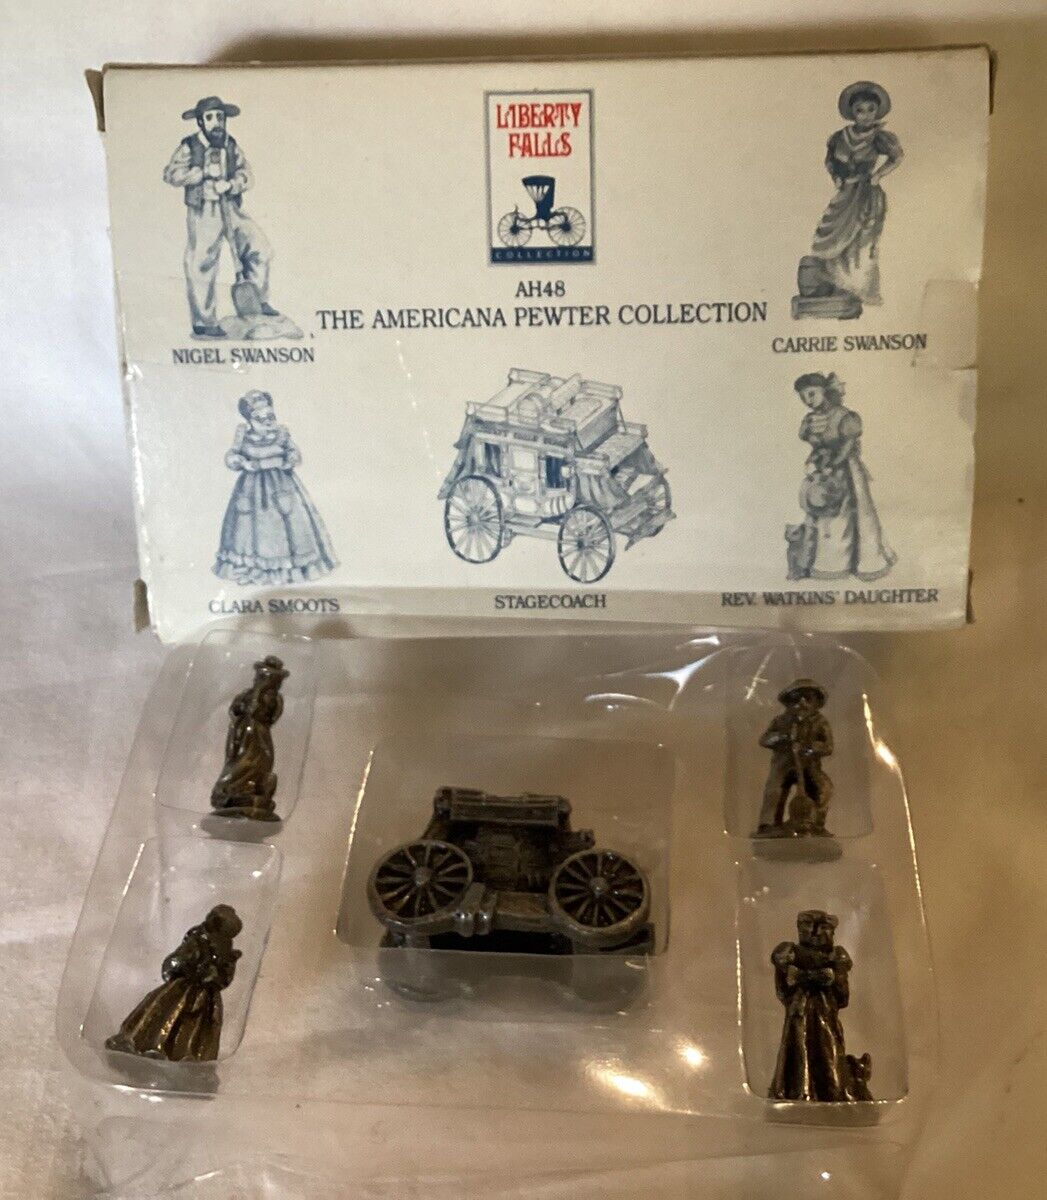 VINTAGE AMERICAN PEWTER COLLECTION 1994 STAGECOACH AH48